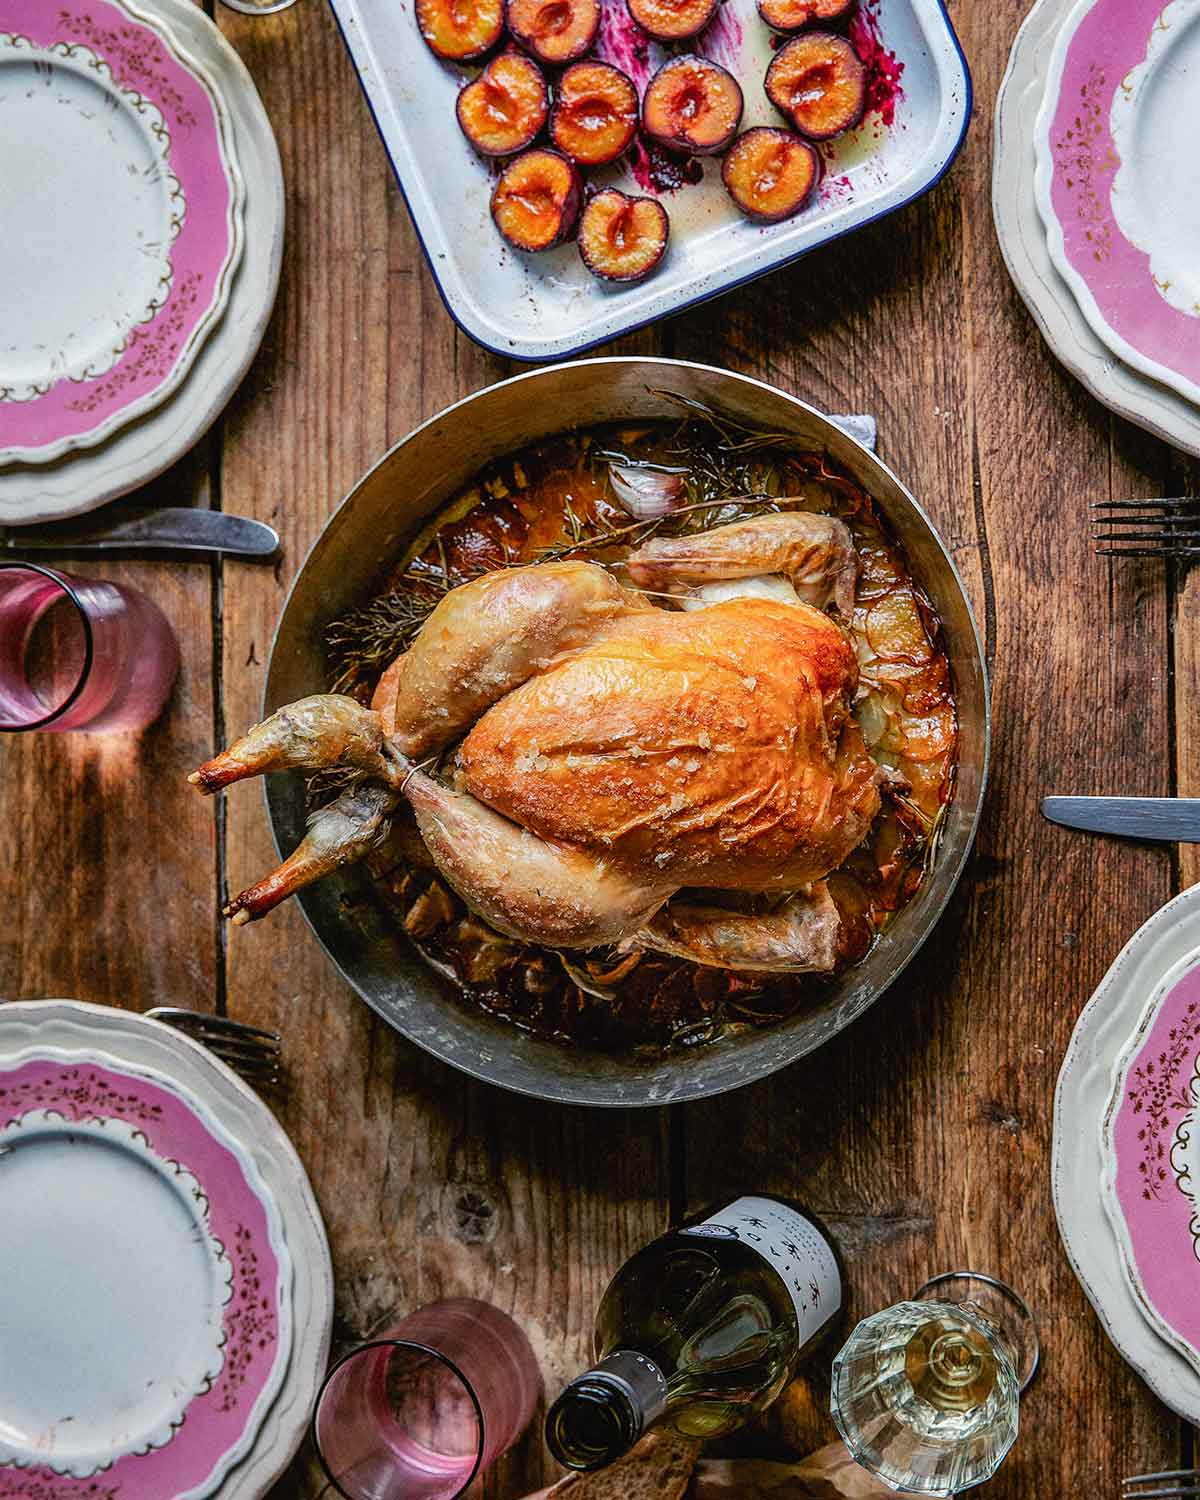 A whole roast chicken with rosemary and potatoes on a wooden table with four plates and a tray of roasted plums beside it.